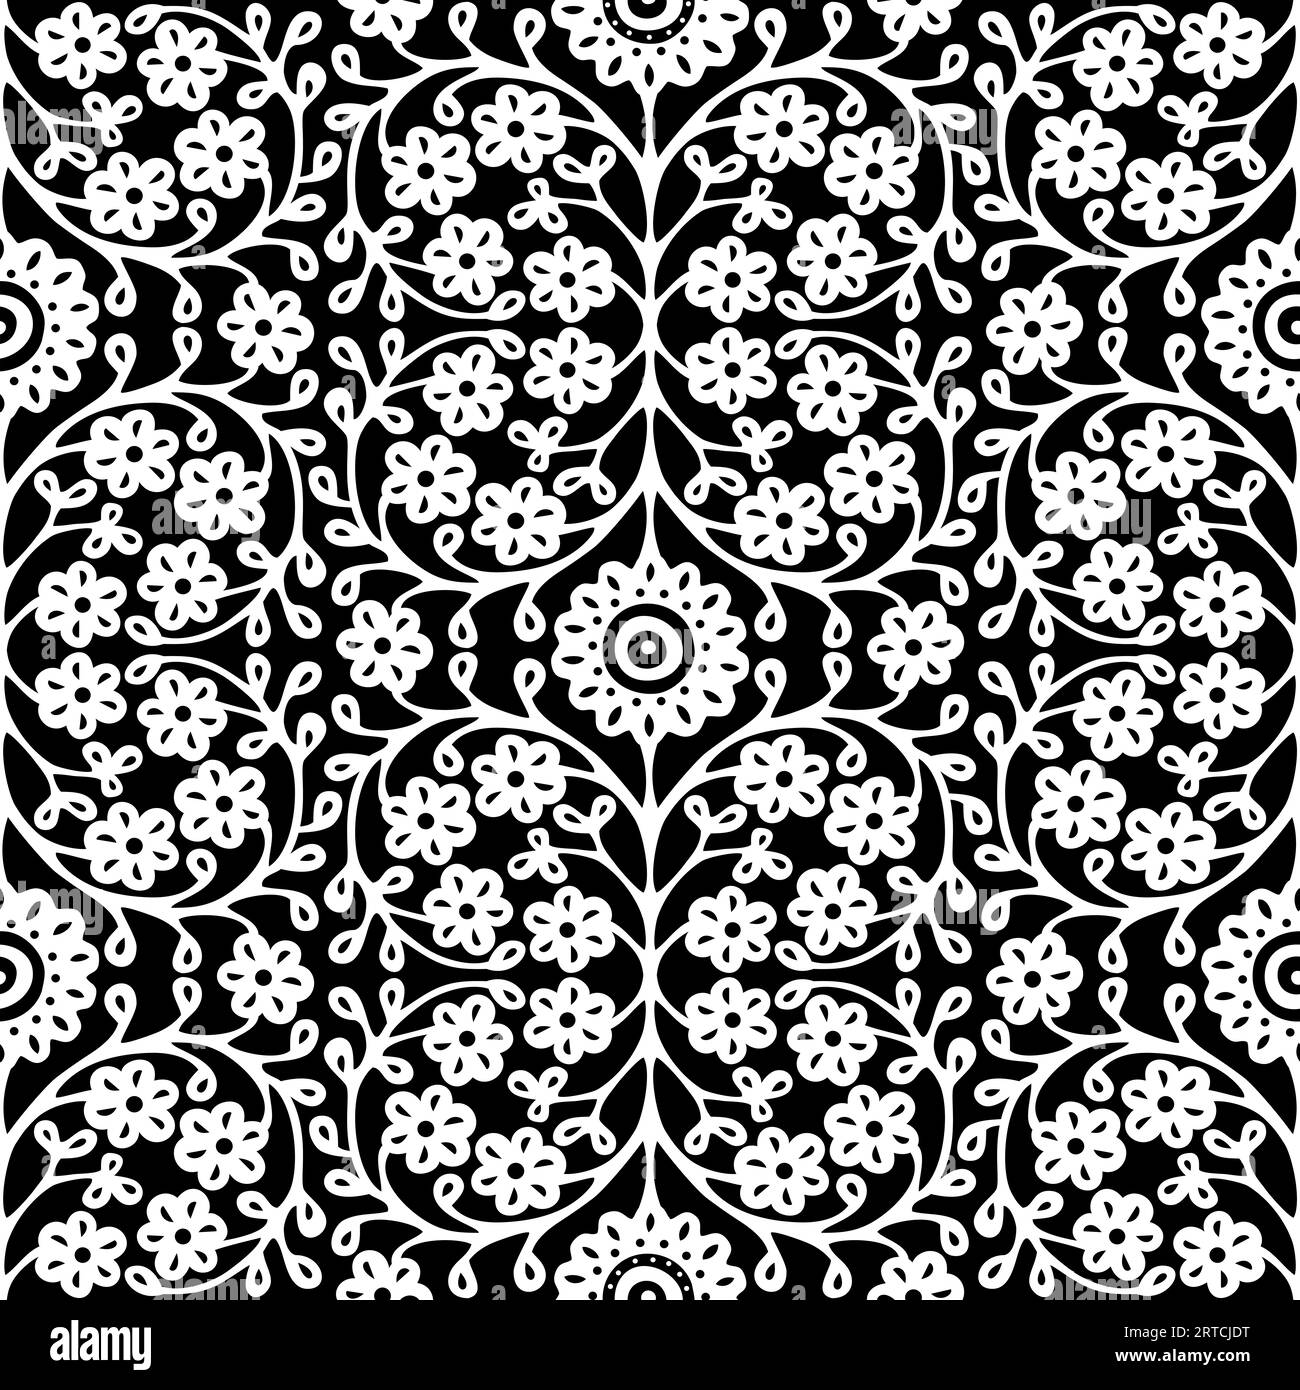 Seamless pattern with Indian ethnic flowers in black and white Stock Photo